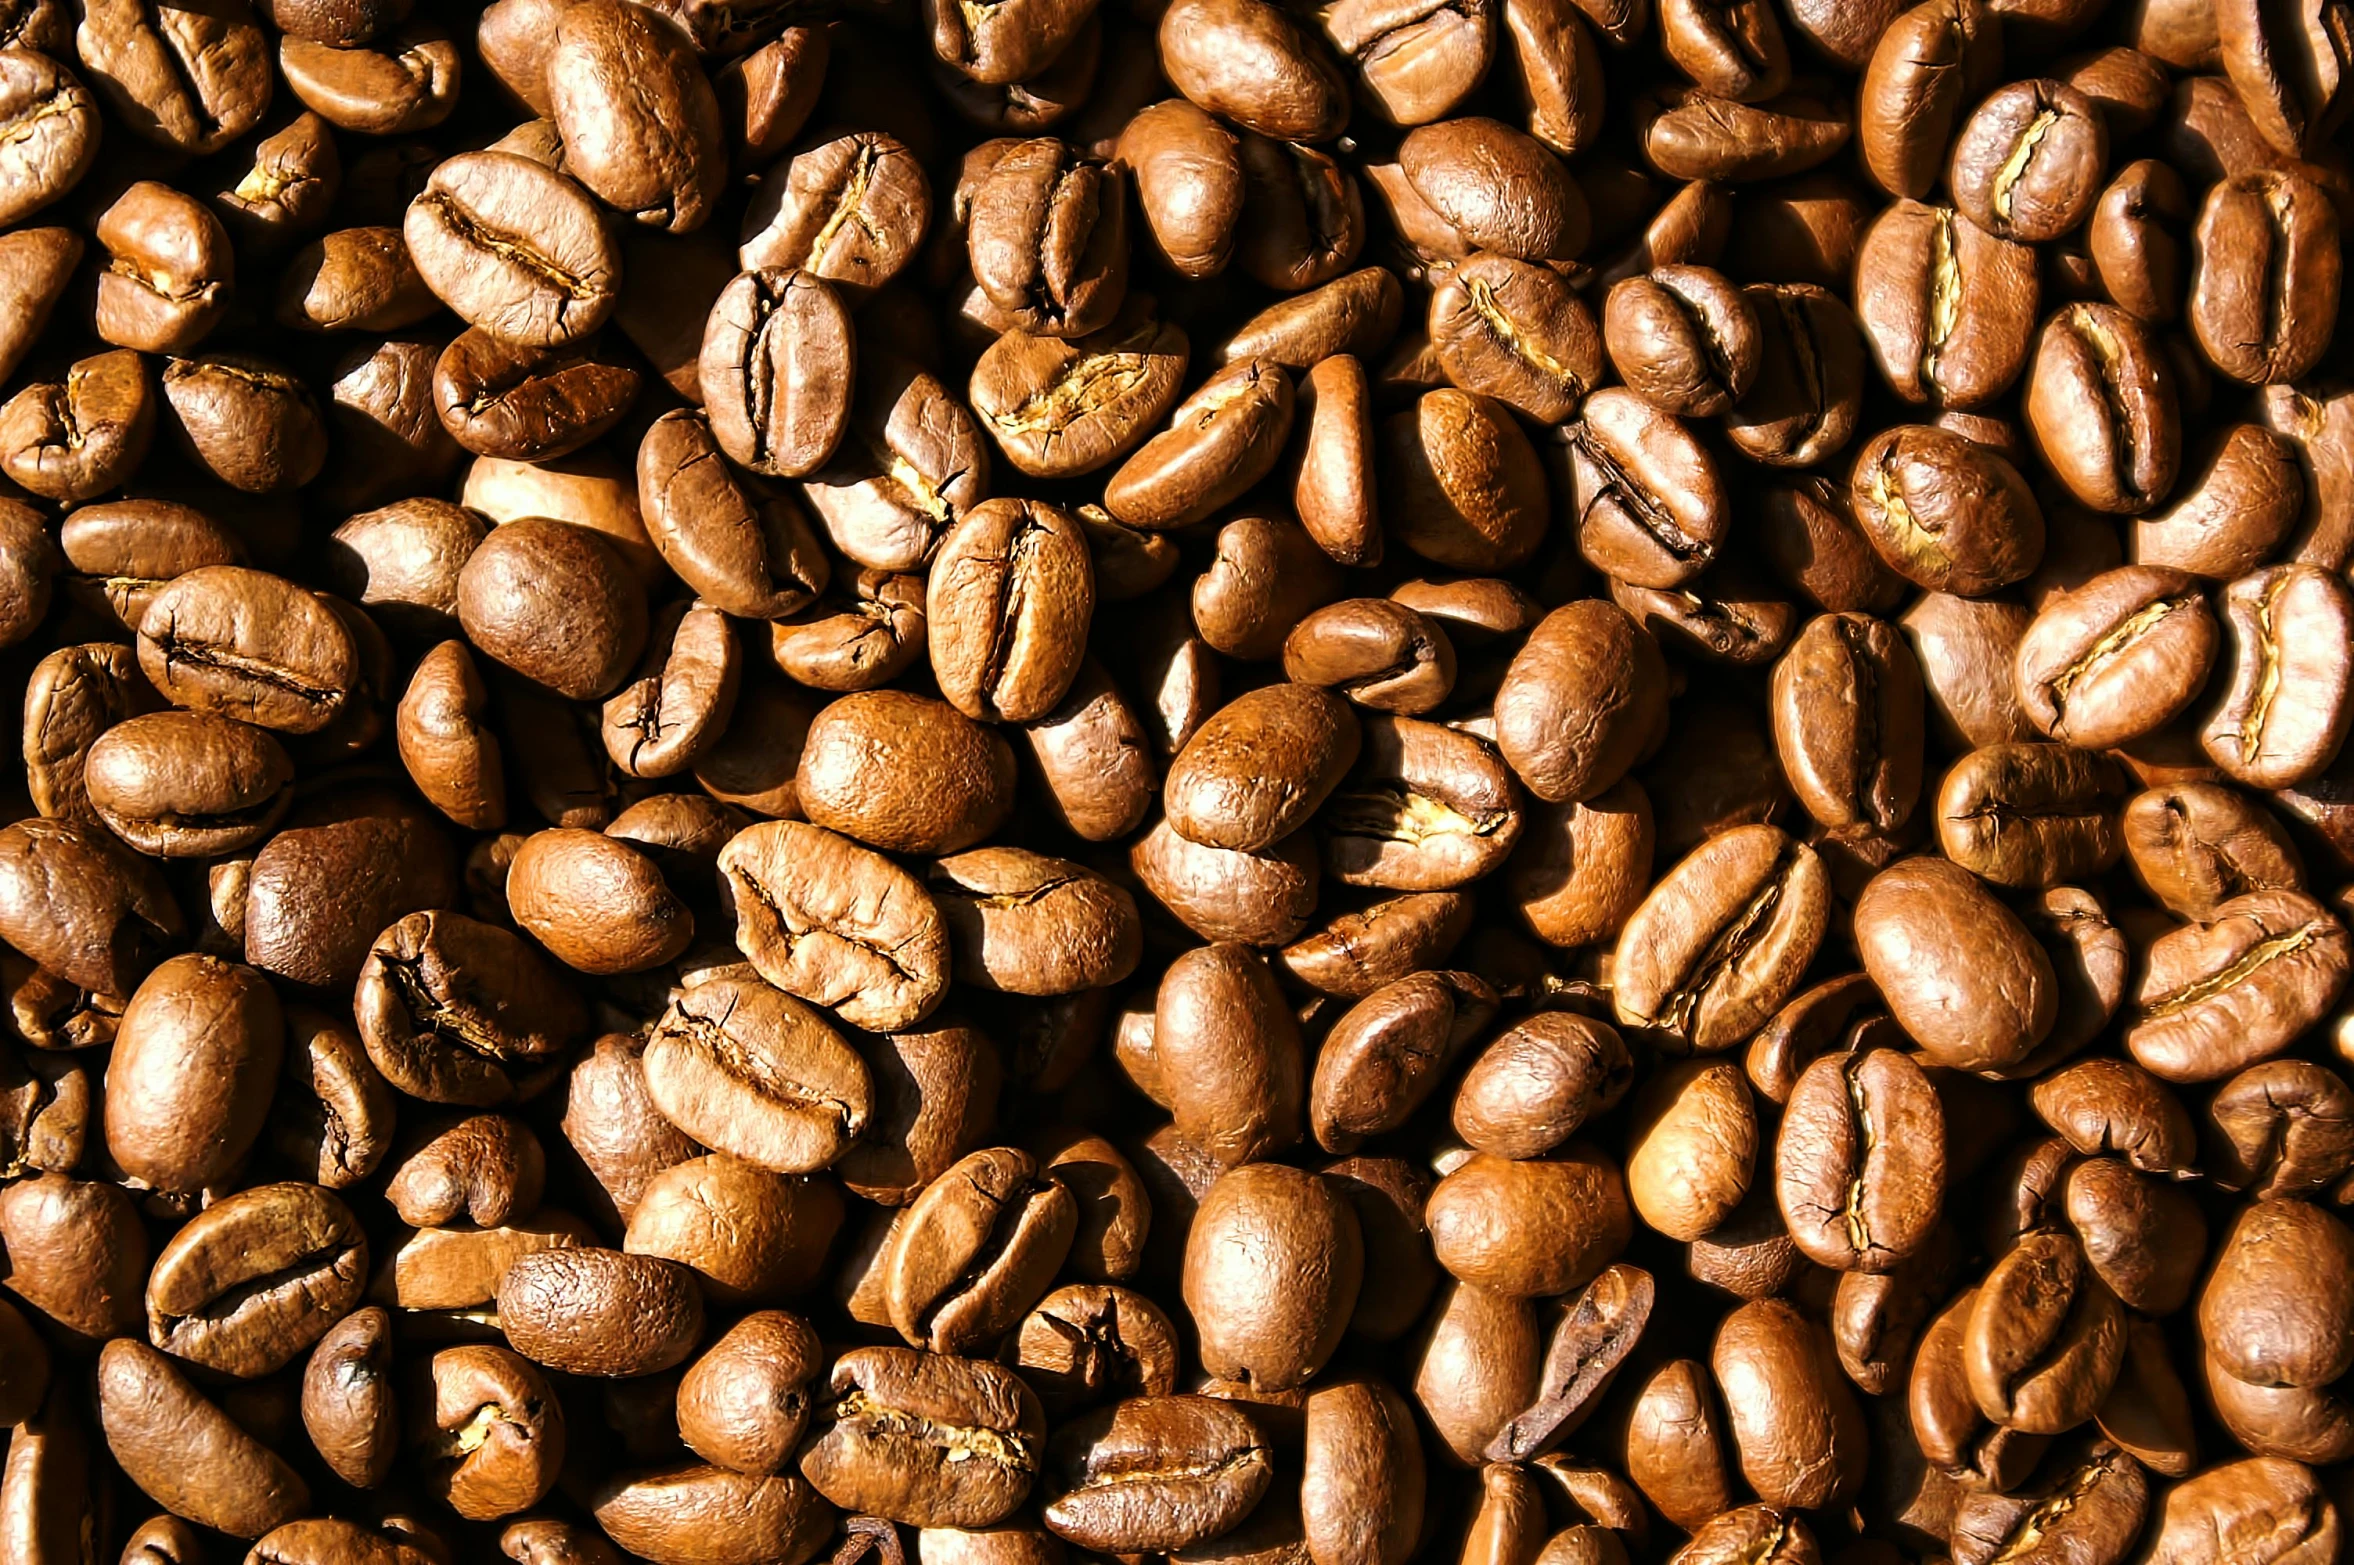 this is a close up view of coffee beans